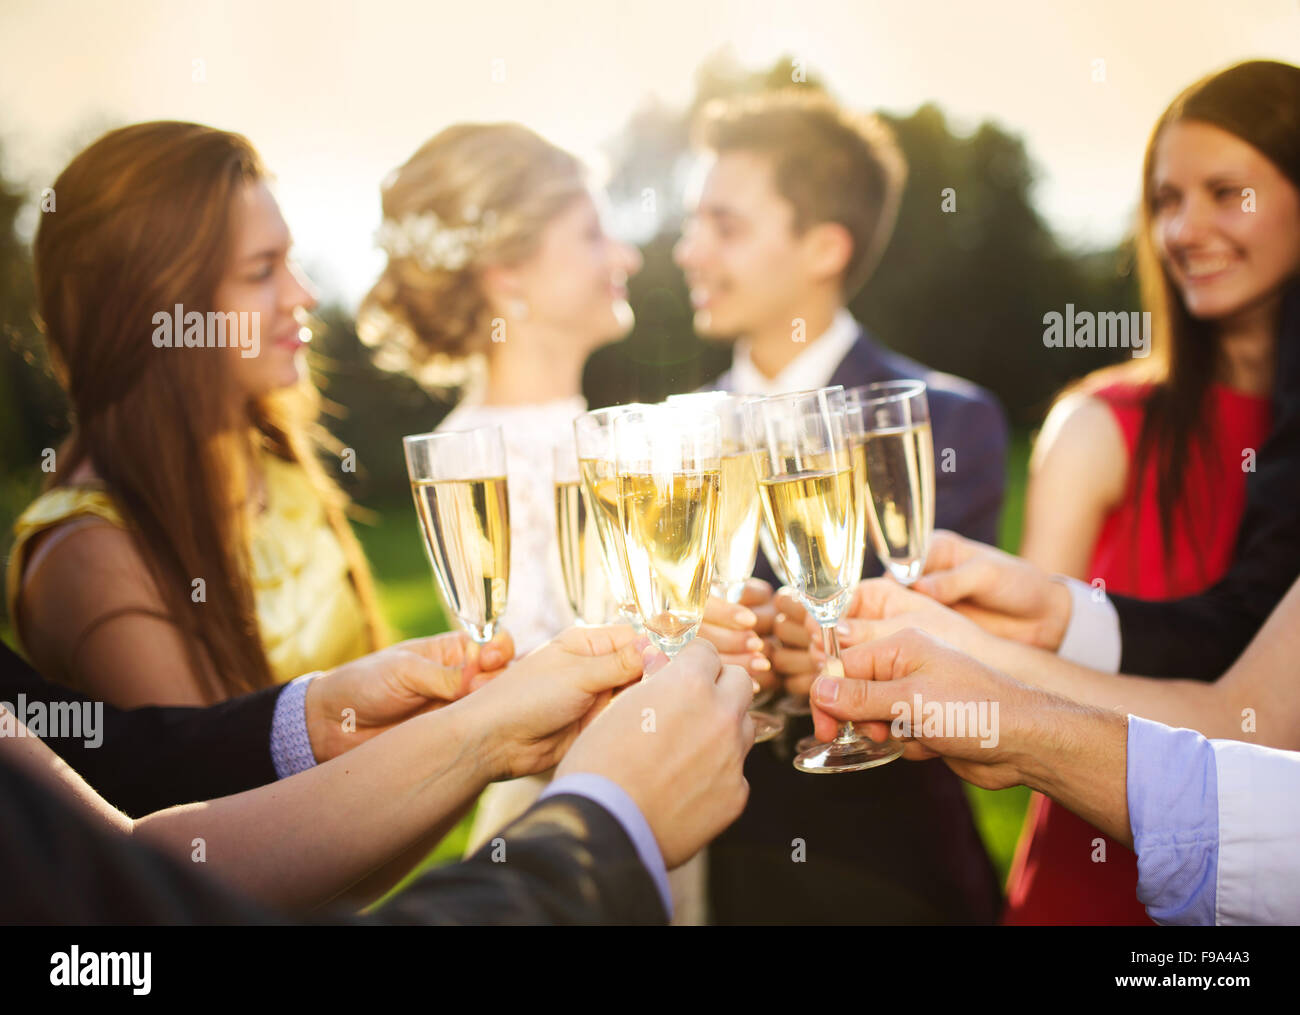 Wedding guests clinking glasses while the newlyweds hugging in the background Stock Photo